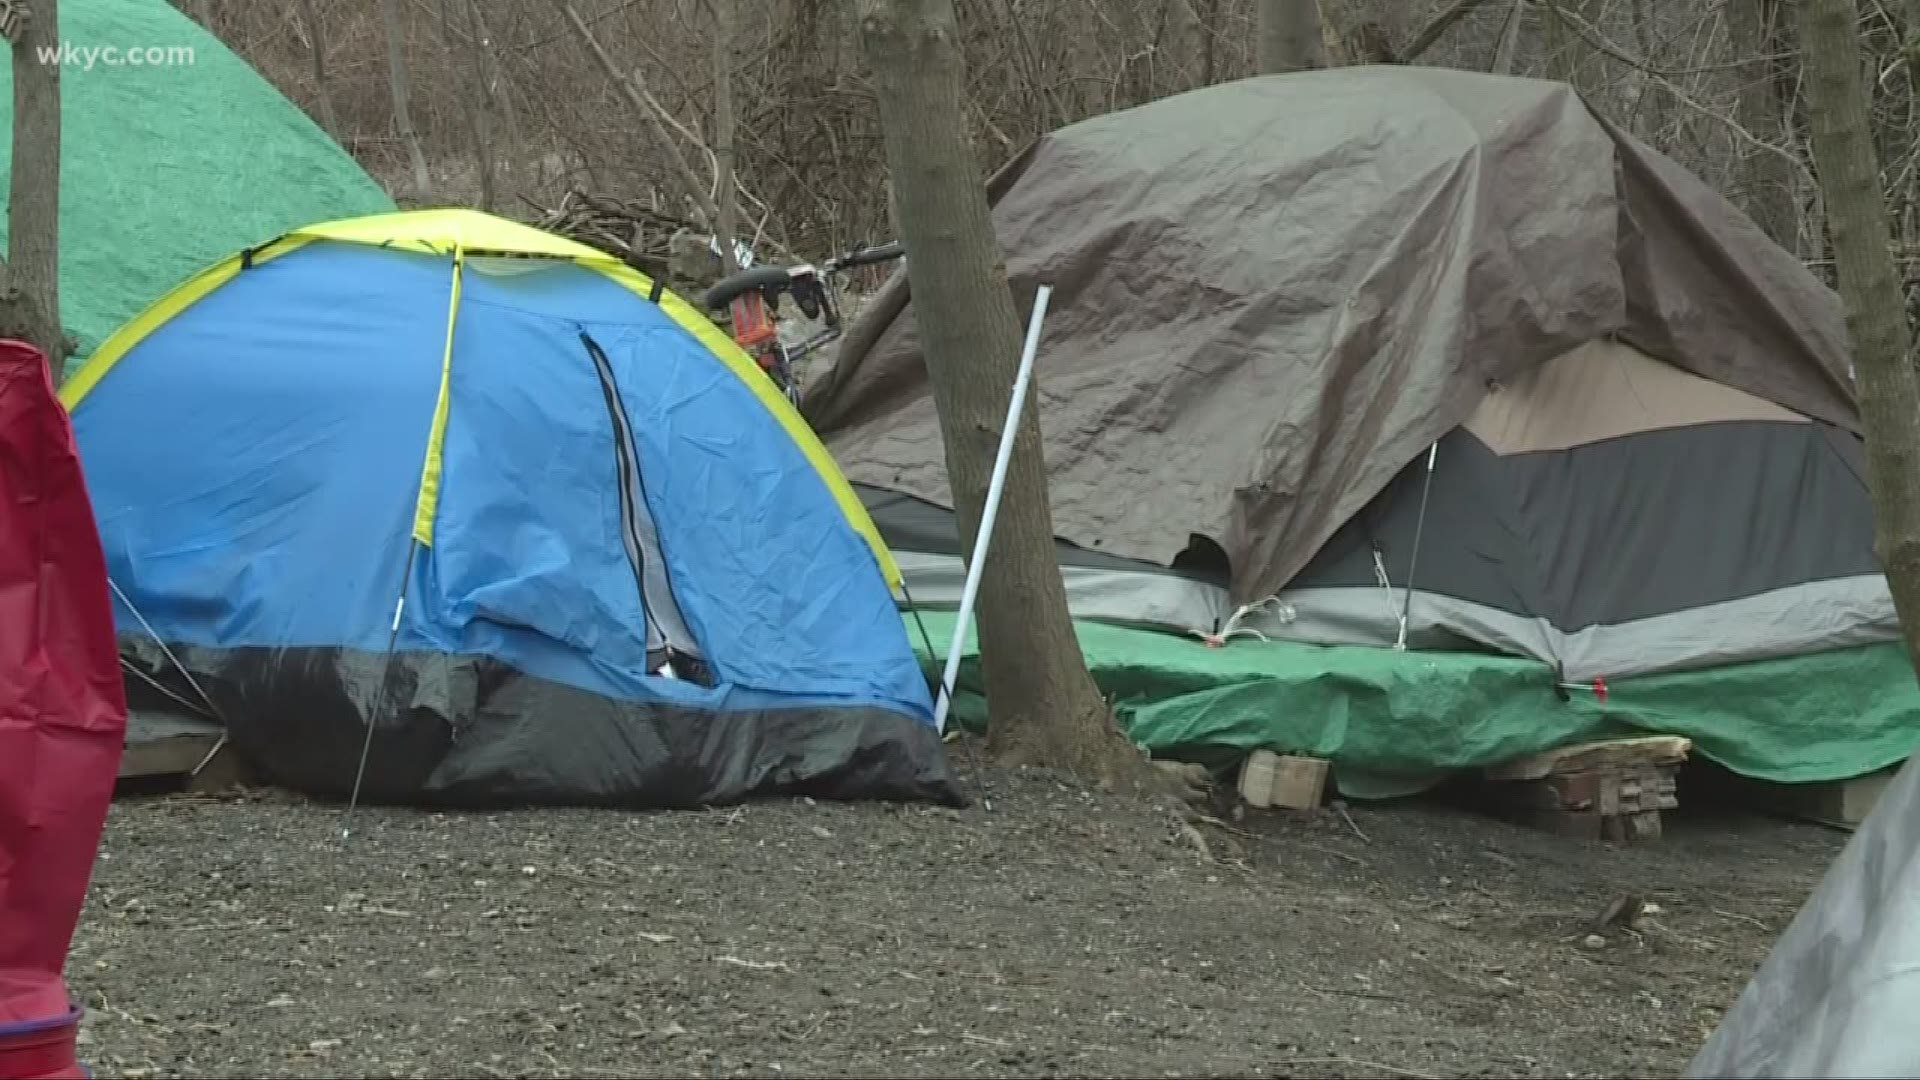 Sept. 18, 2018: Akron City Council on Monday voted to eliminate 'Tent City', a campground where local homeless people are known to stay in tents.